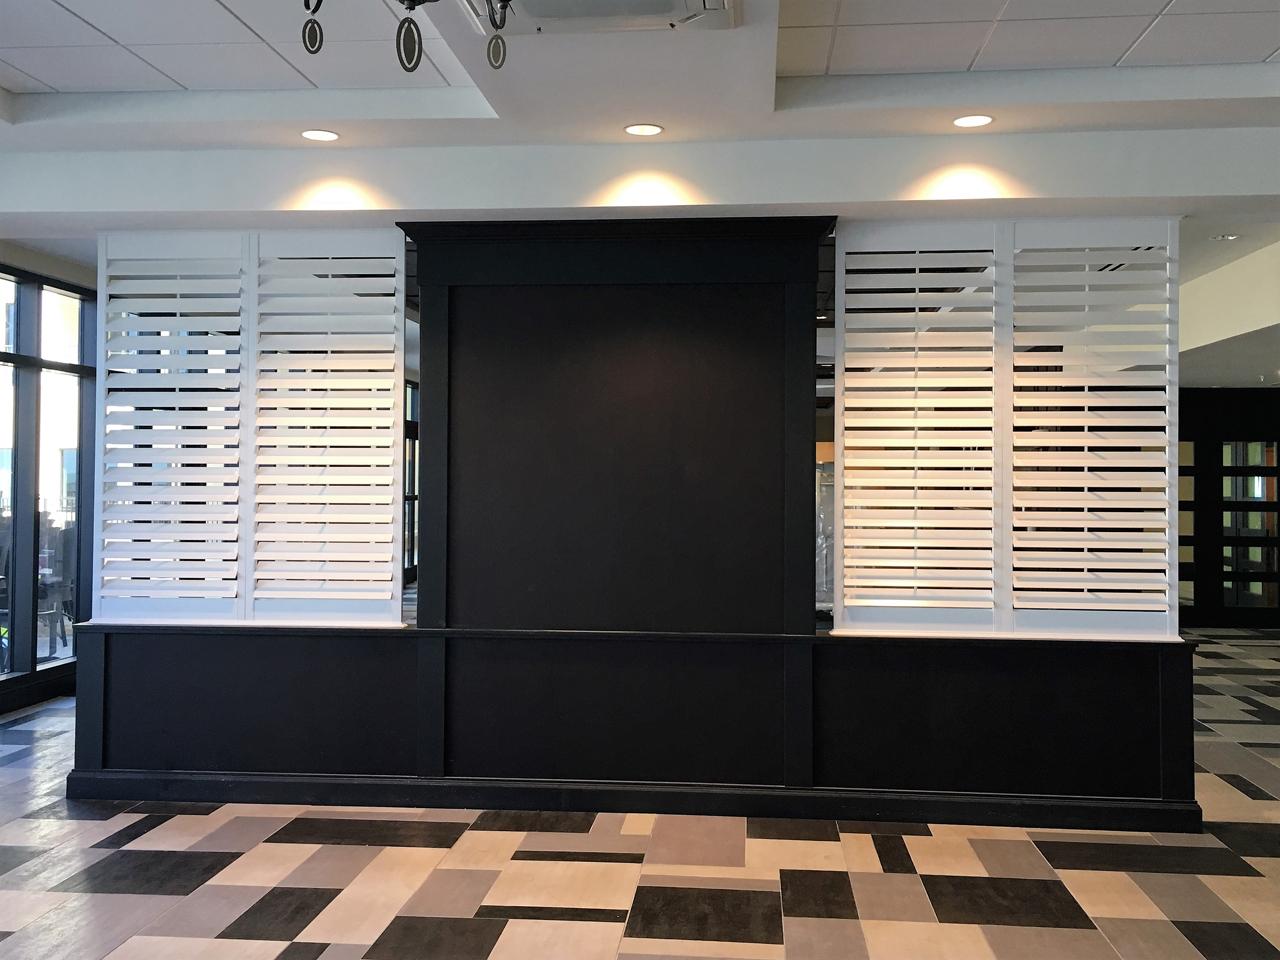 Louvered shutters on a kiosk in a hotel